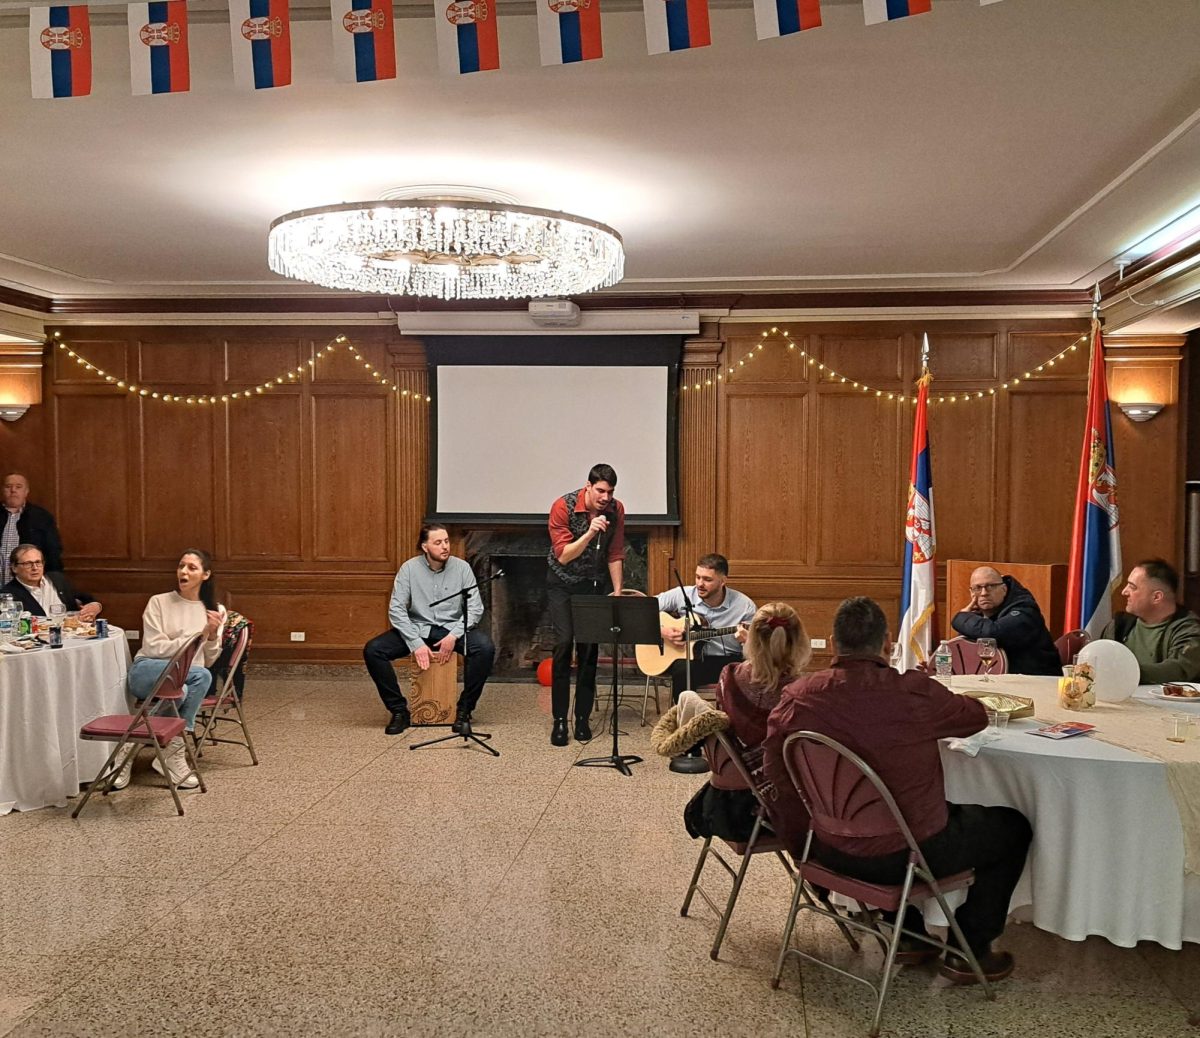 At the 2nd Annual Serbian Day, Aleksandar Slavkovic 26 performs as the lead singer for a Serbian student concert.